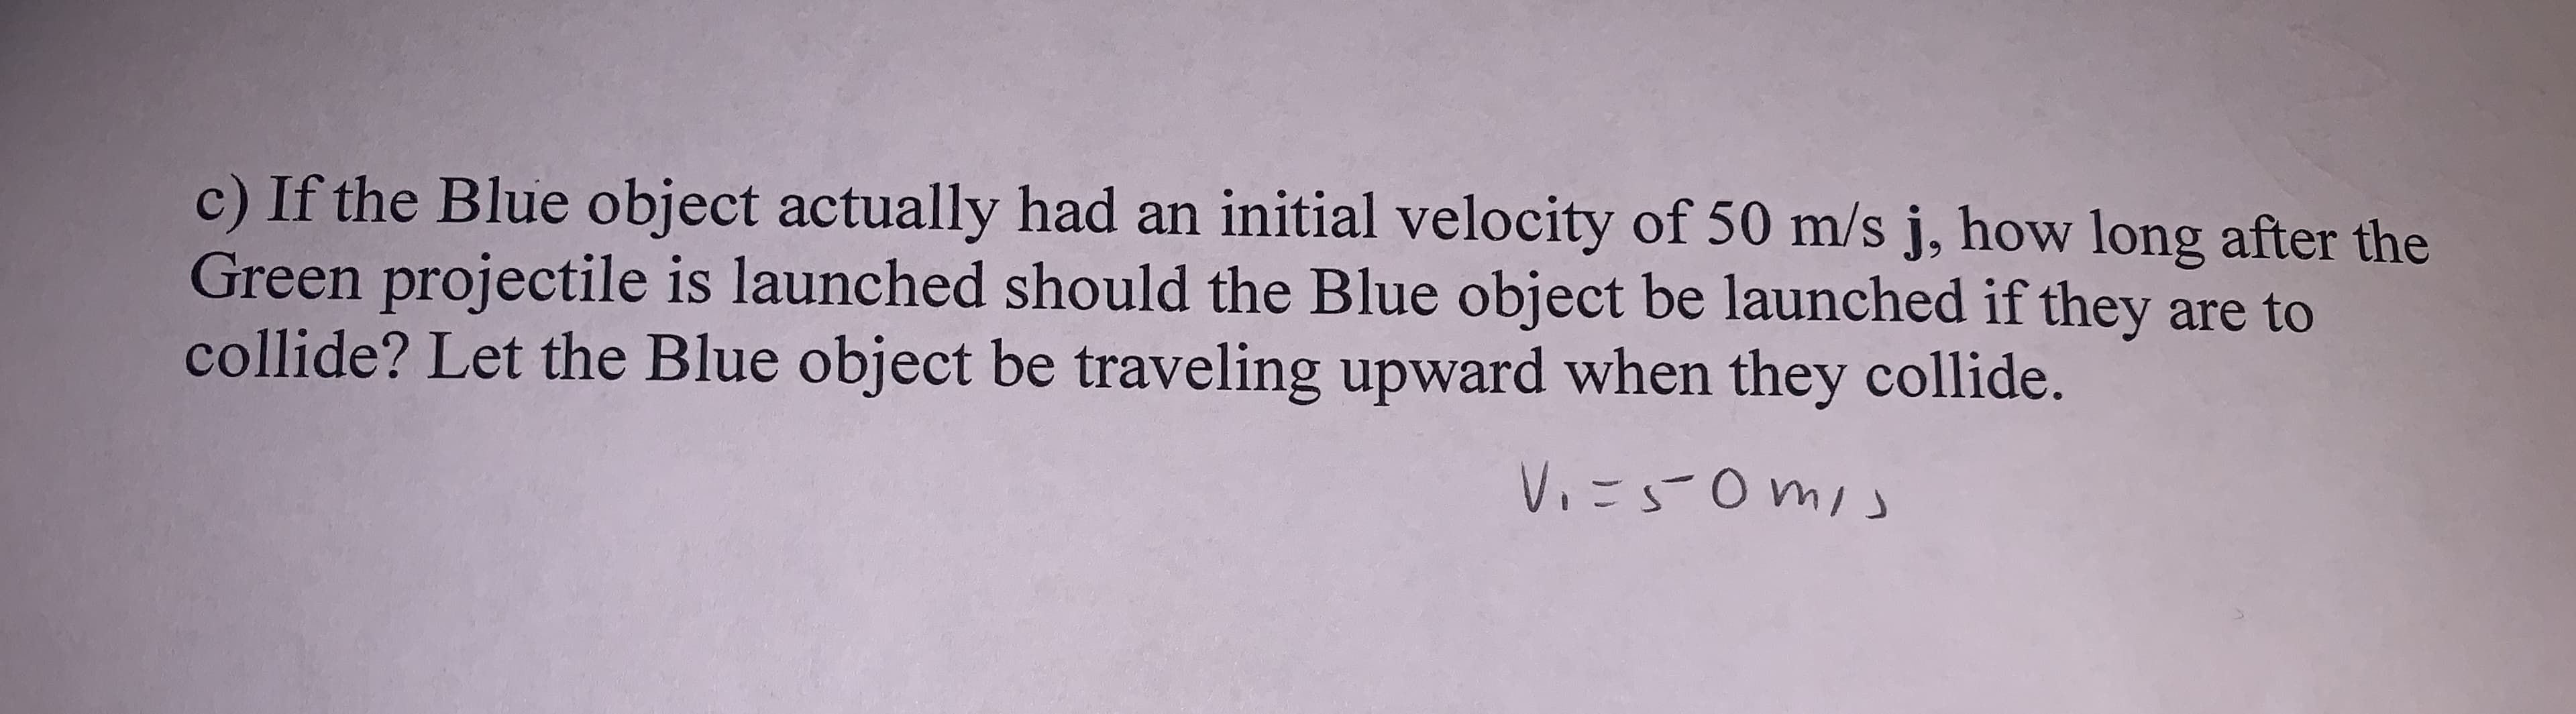 c) If the Blue object actually had an initial velocity of 50 m/s j, how long after the
Green projectile is launched should the Blue object be launched if they are to
collide? Let the Blue object be traveling upward when they collide.
V.=S0mis
